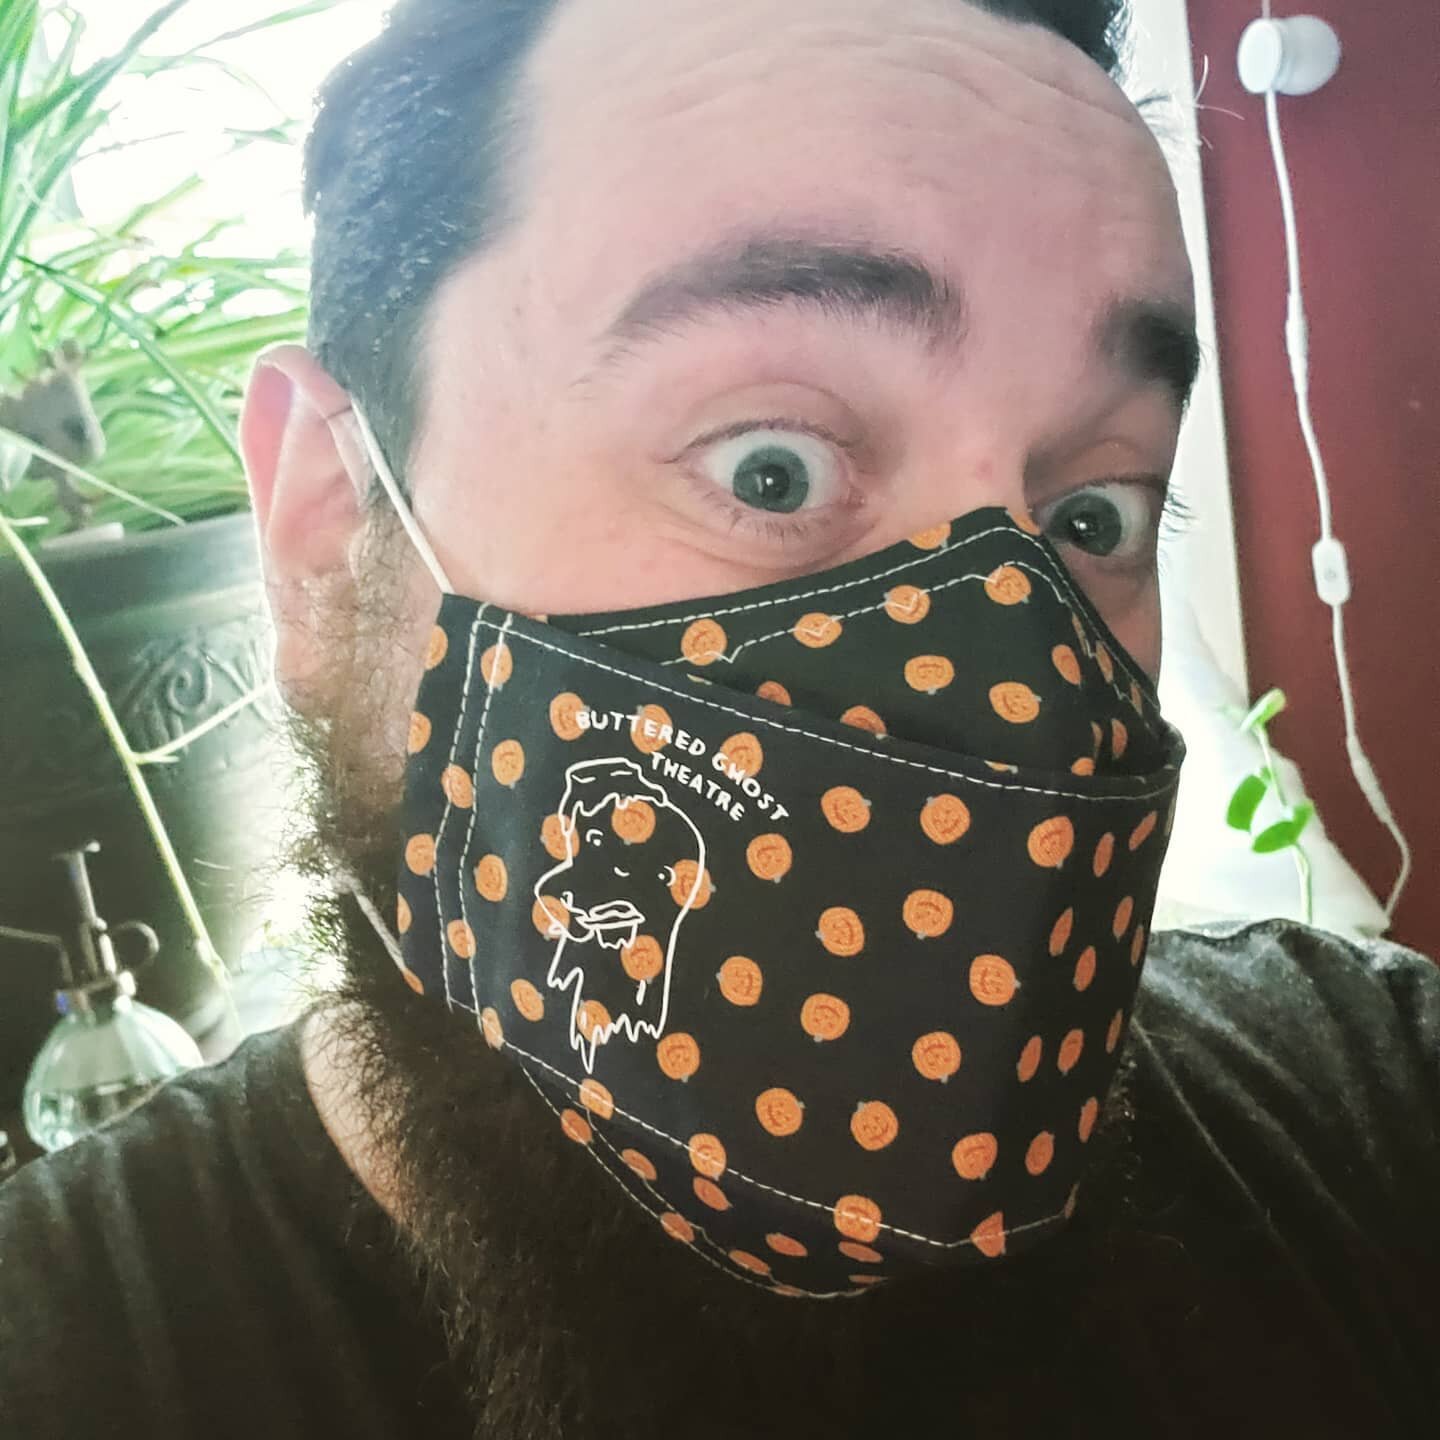 Check out my new branded masks created by the ever amazing @prism.power 
Get one for yourself at https://www.etsy.com/shop/mxstitches